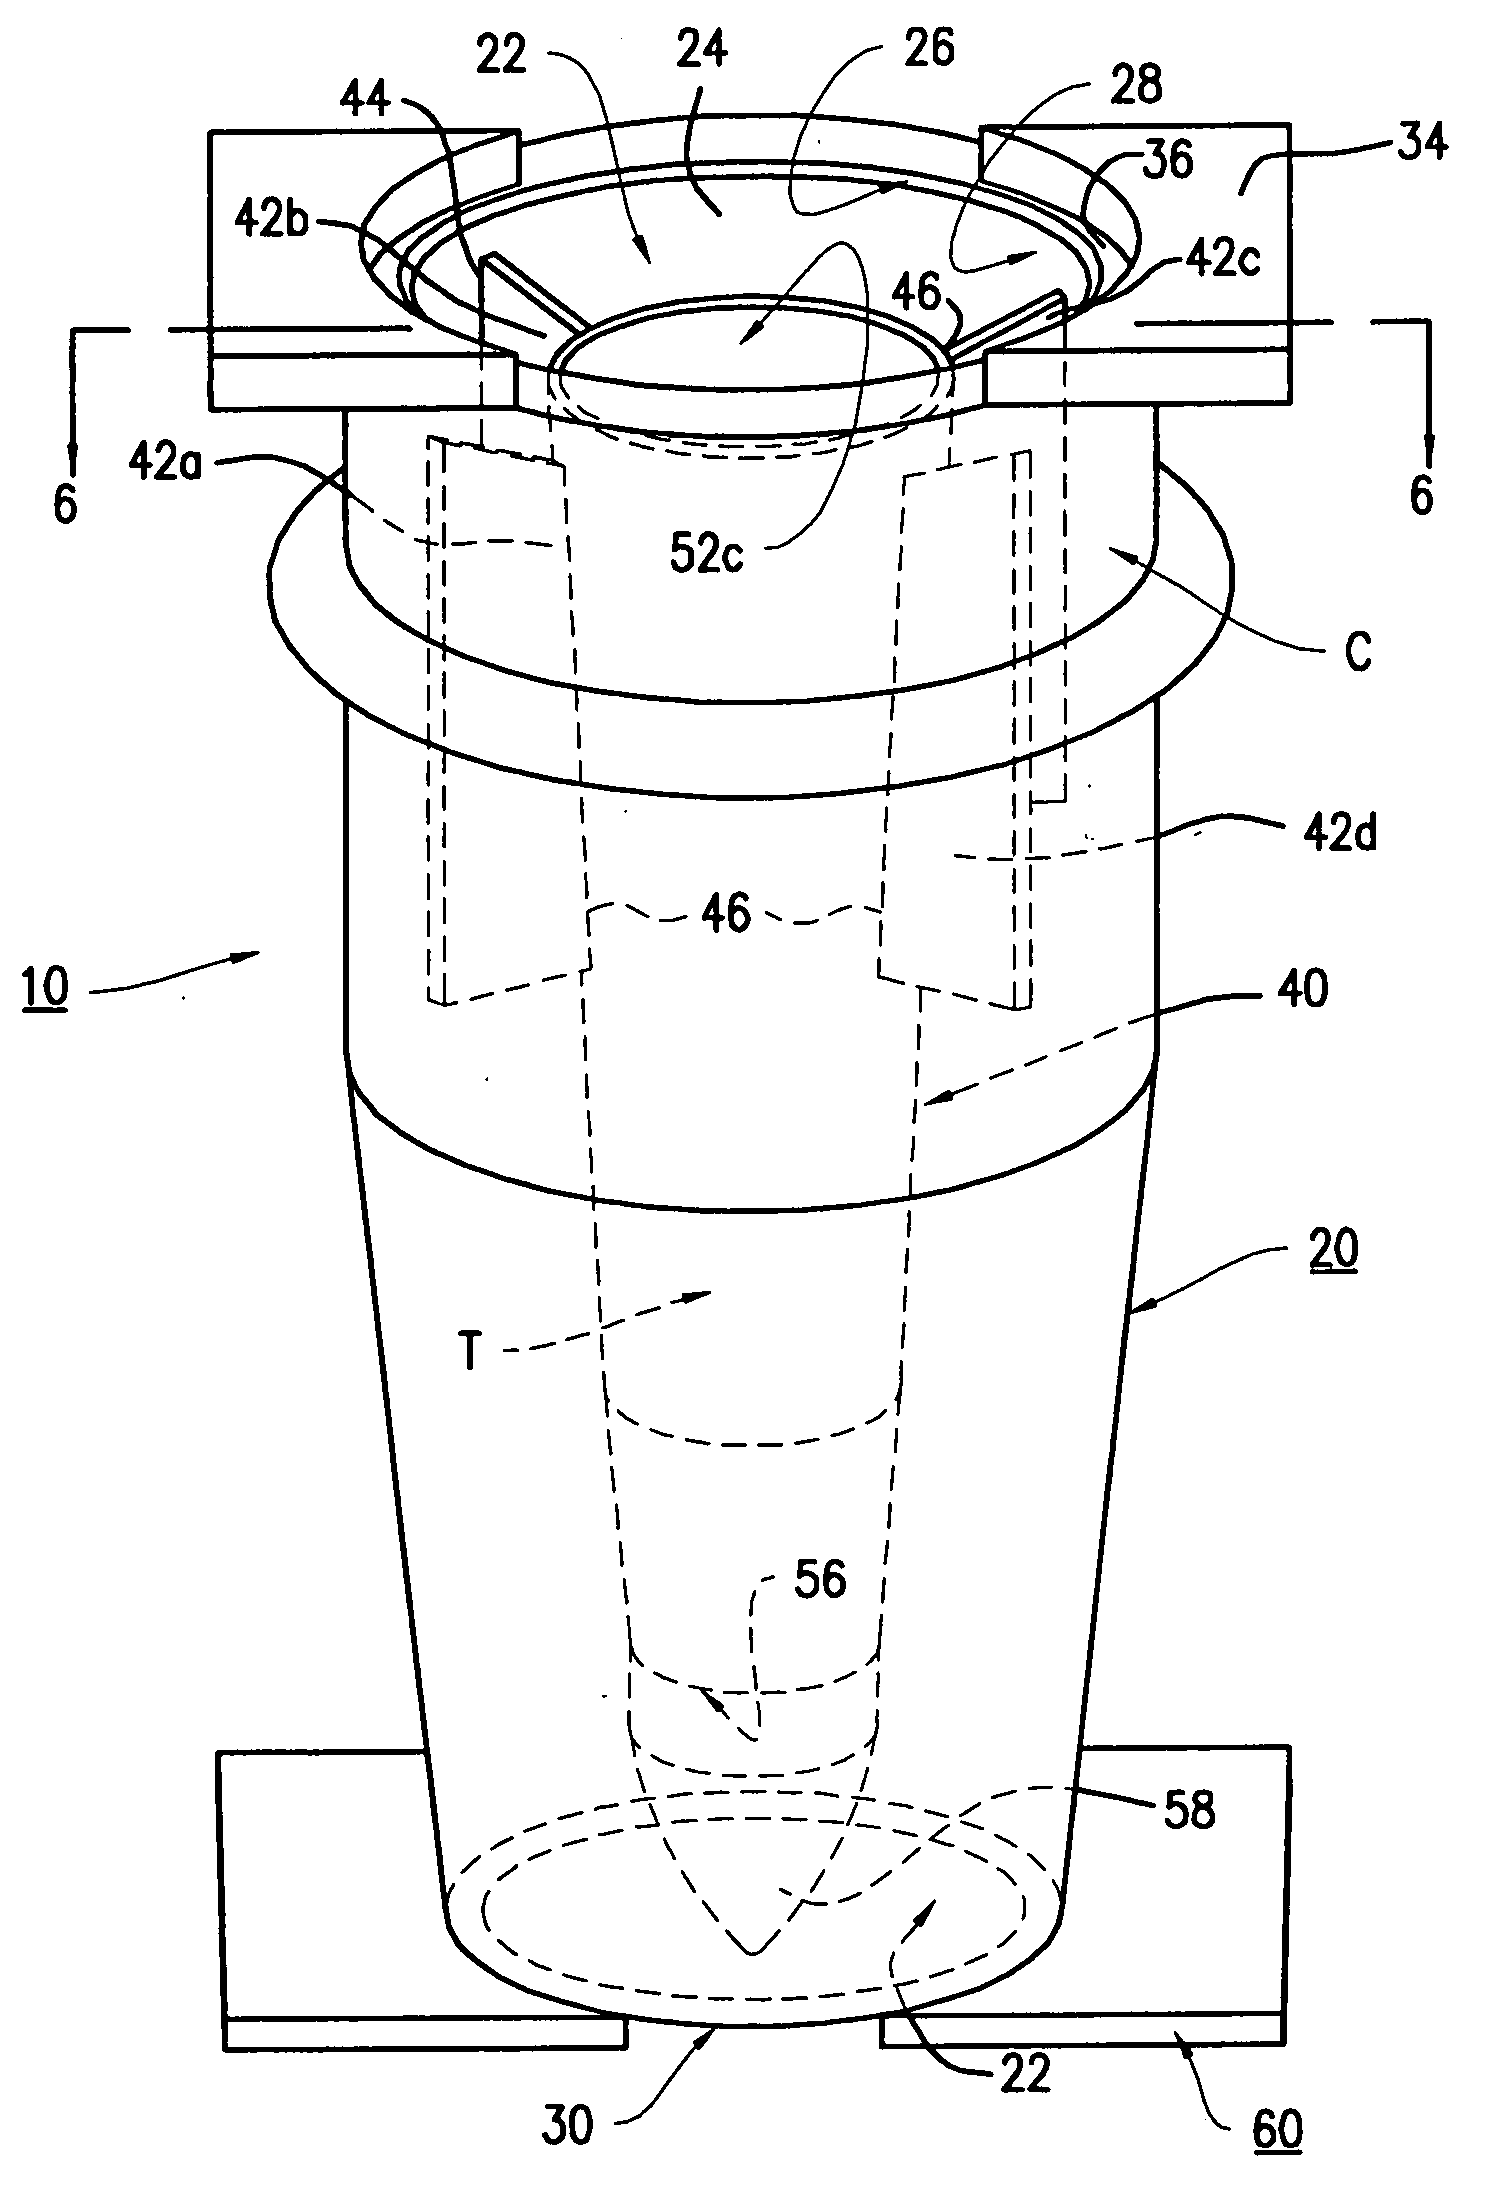 Ice cream and topping mixing attachment